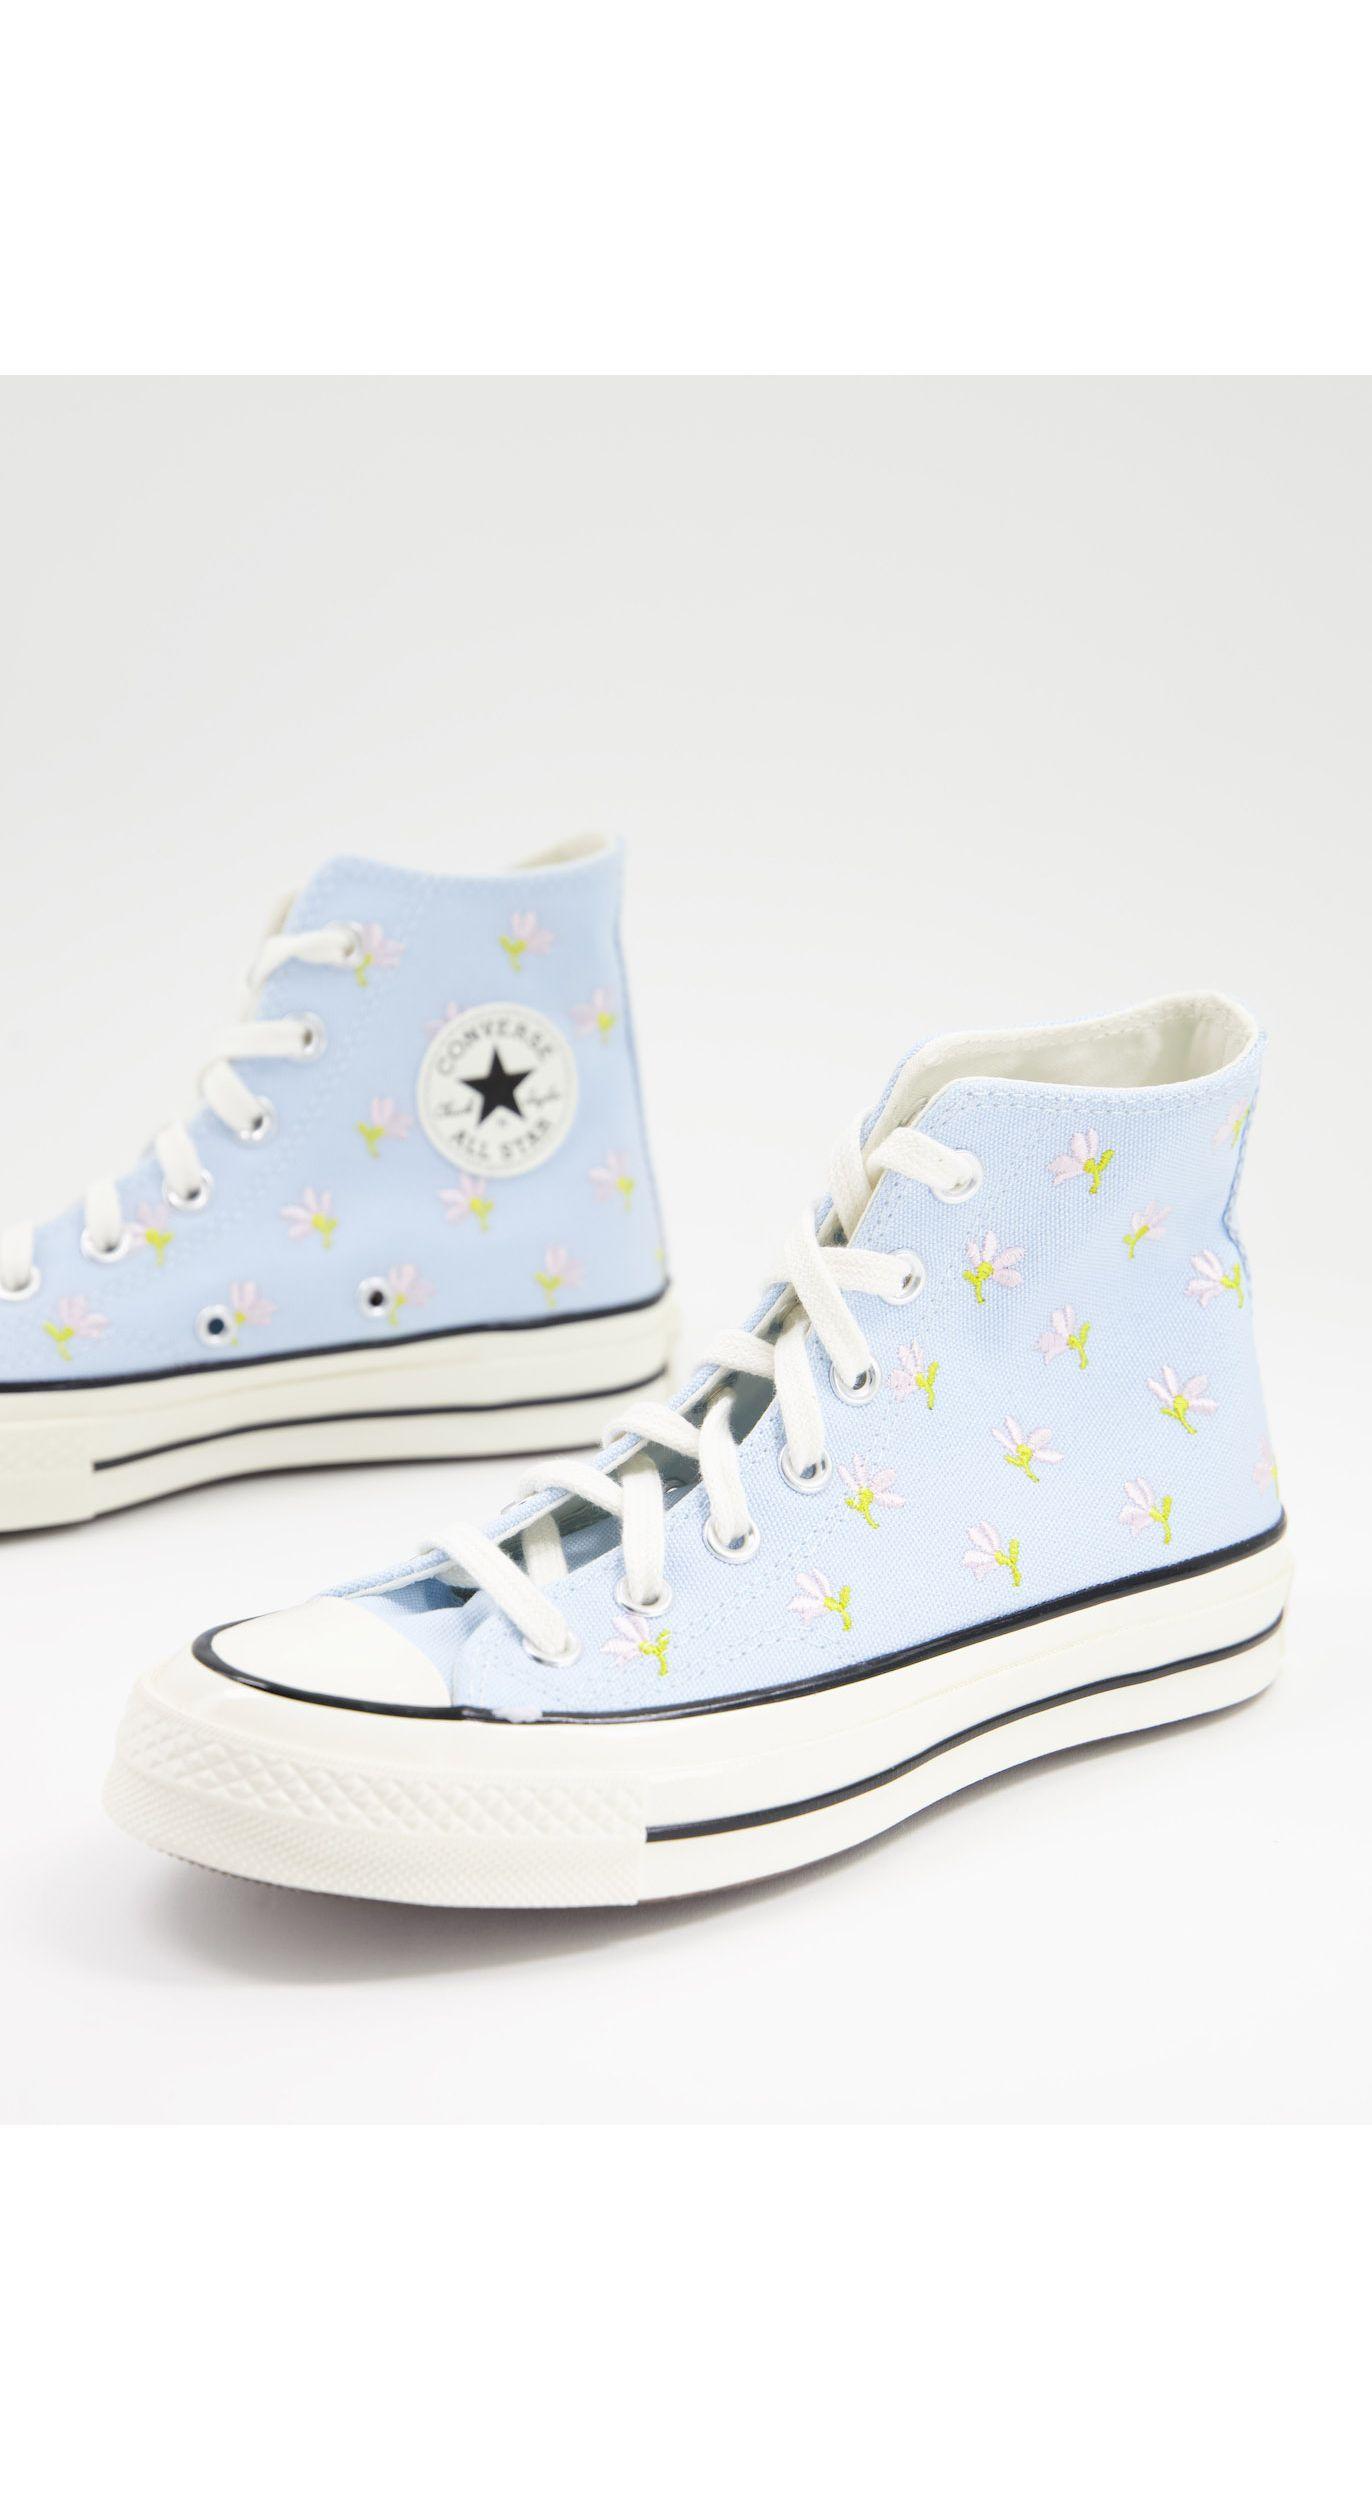 Converse Chuck 70 Hi Floral Embroidered Trainers in Blue | Lyst Australia